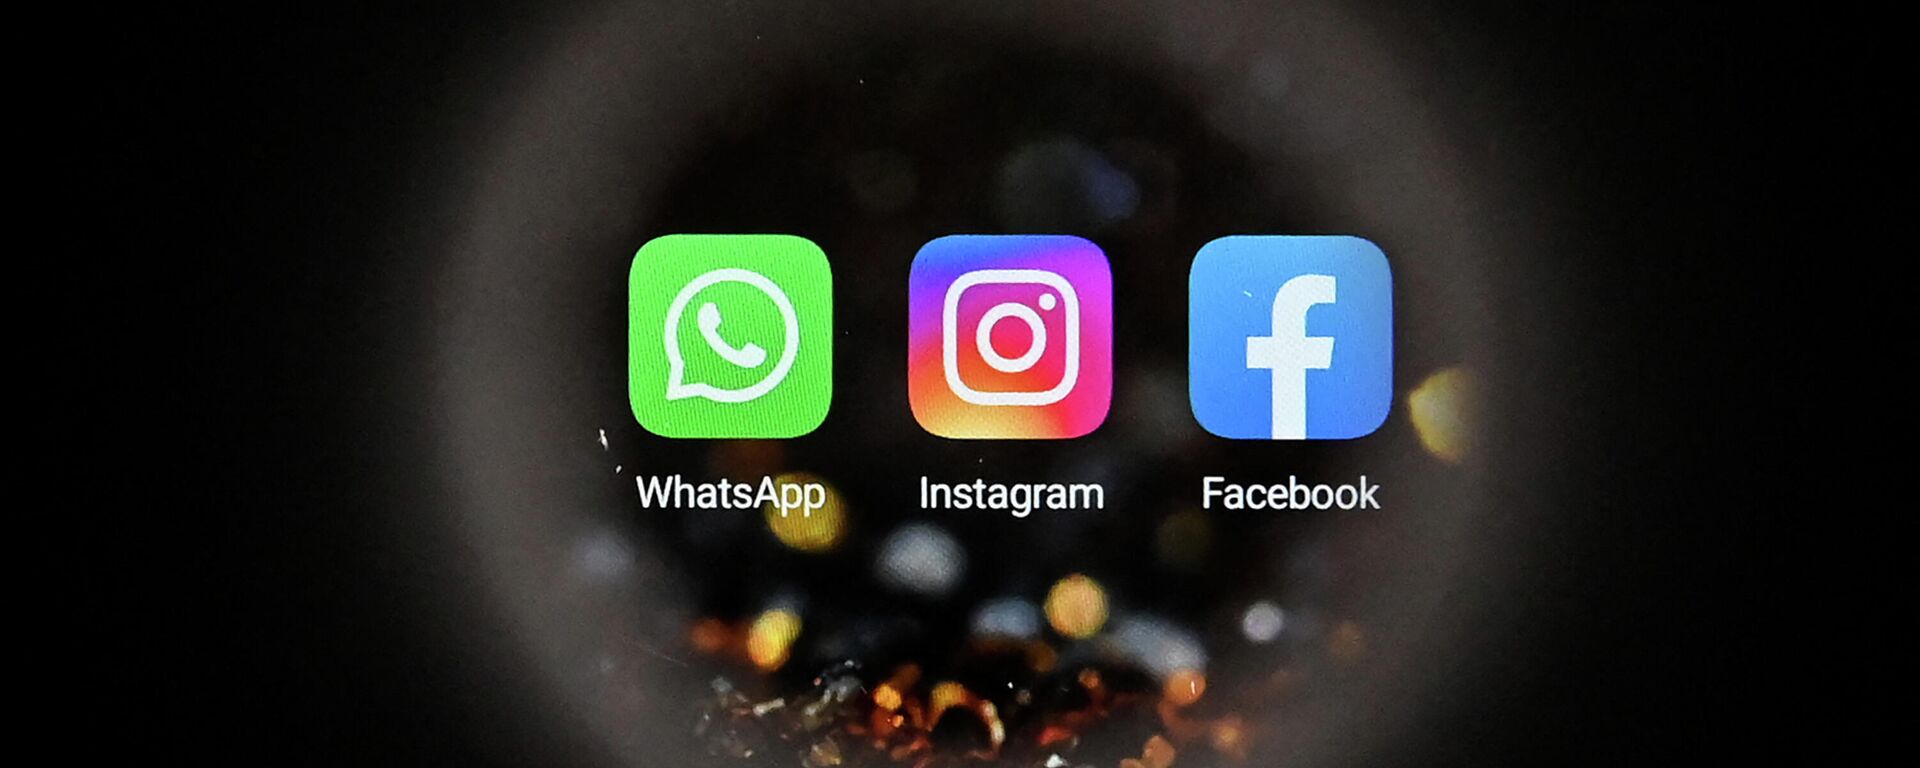 This picture taken in Moscow on October 5, 2021 shows the US online social media and social networking service Facebook's logo (R), the US instant messaging software Whatsapp's logo (L) and the US social network Instagram's logo (C) on a smartphone screen.  - Sputnik International, 1920, 14.10.2021